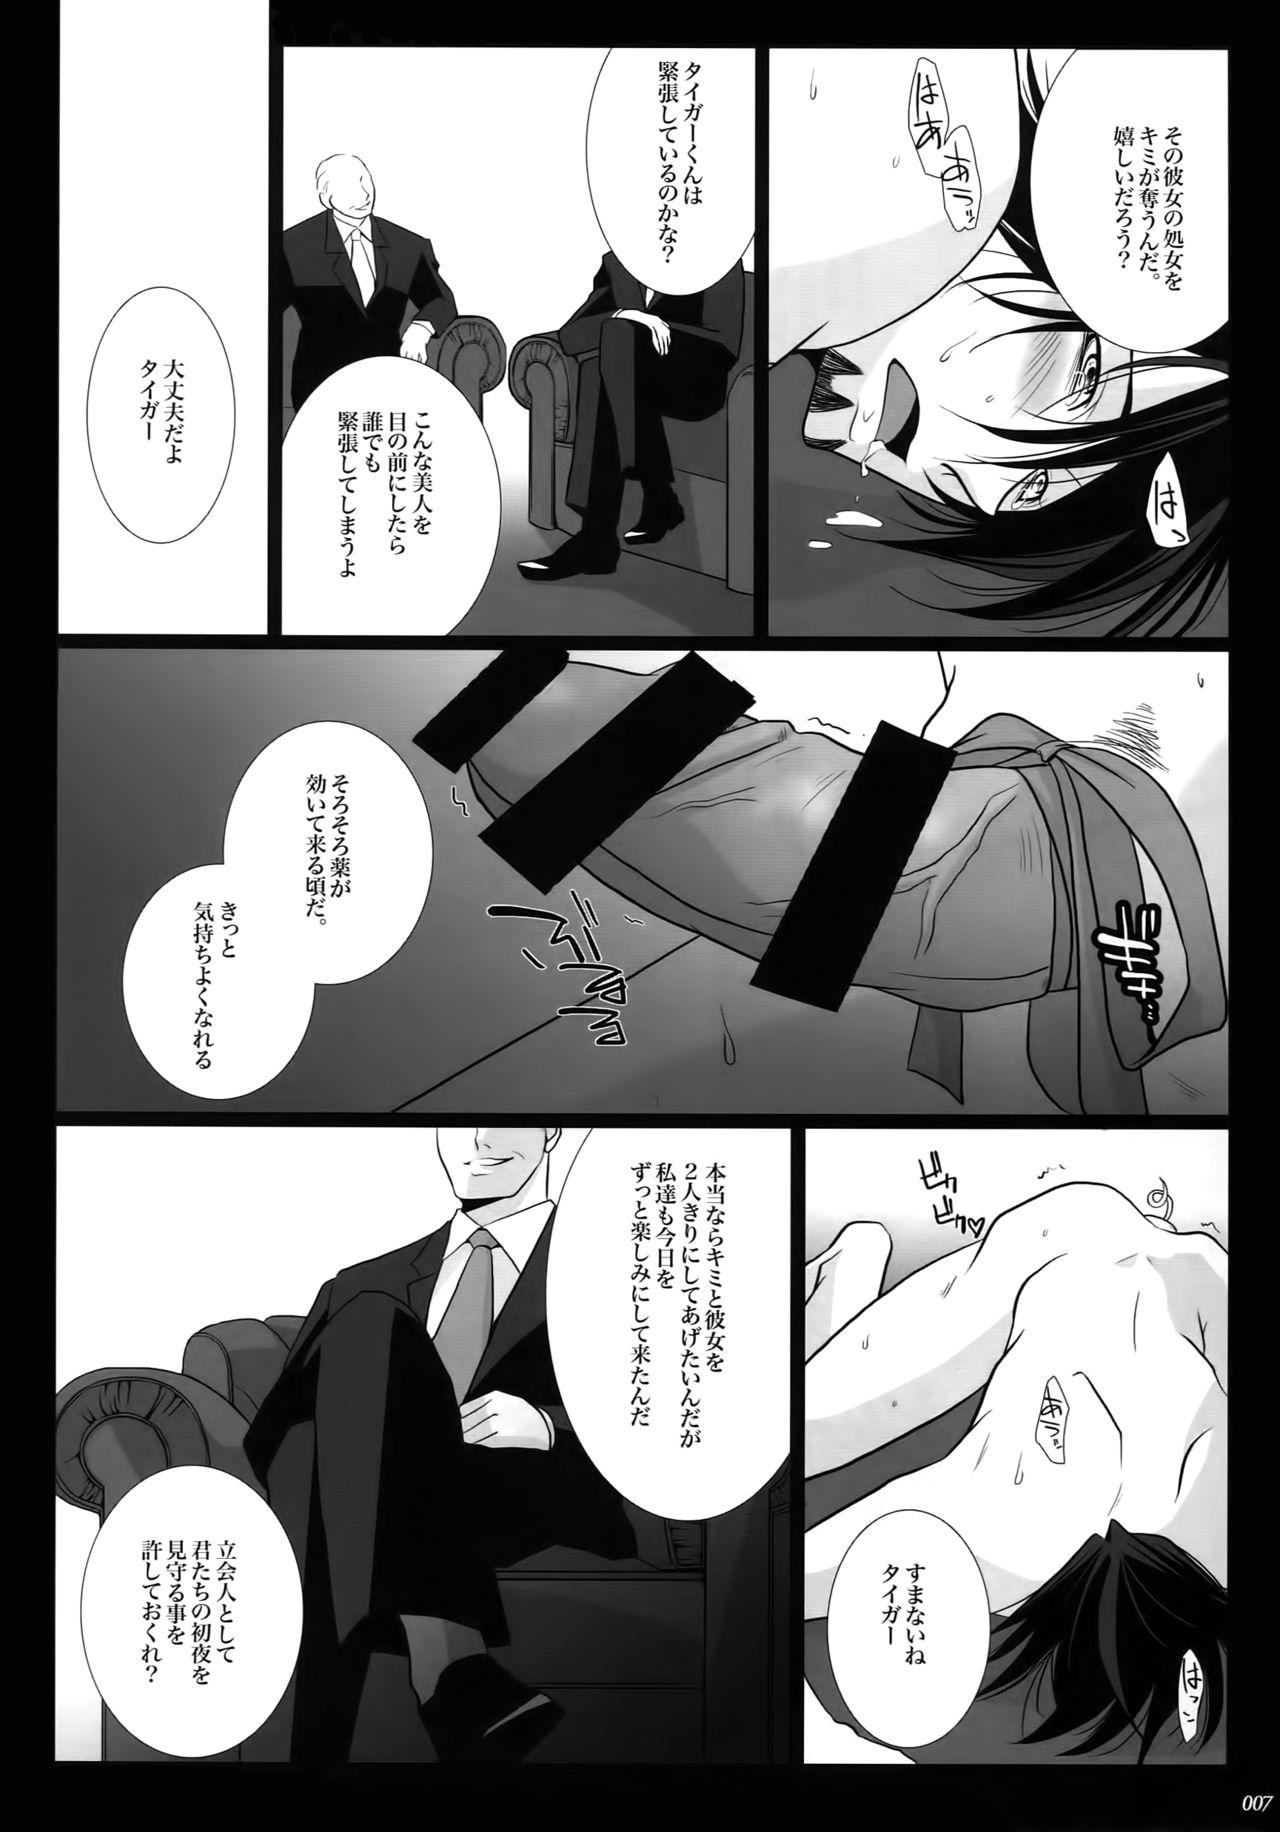 Blow Job mob;Re - Tiger and bunny Furry - Page 6